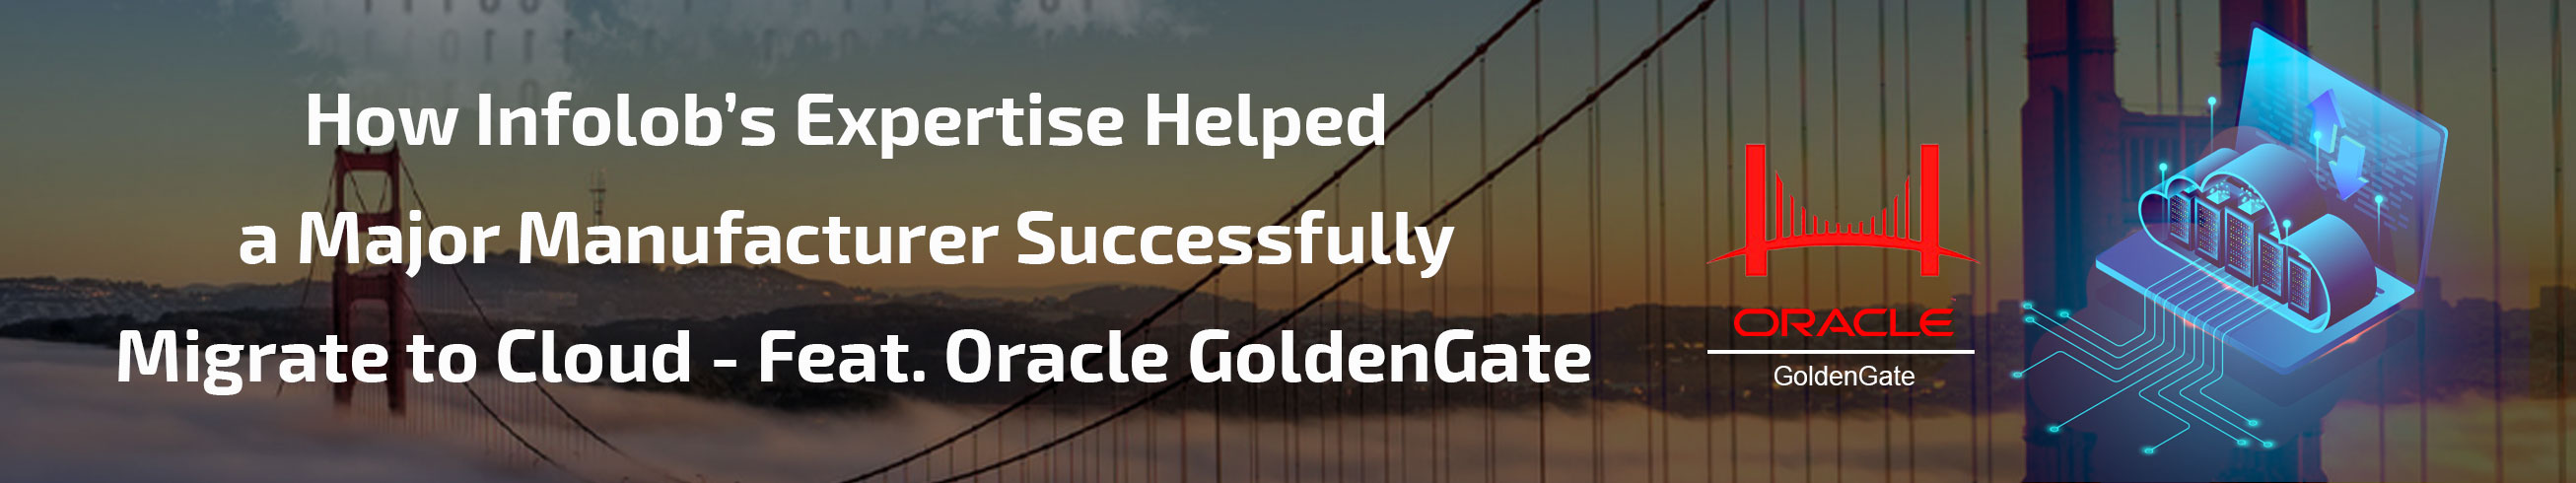 How Infolob’s Expertise Helped a Major Manufacturer Successfully Migrate to Cloud – Feat. Oracle GoldenGate